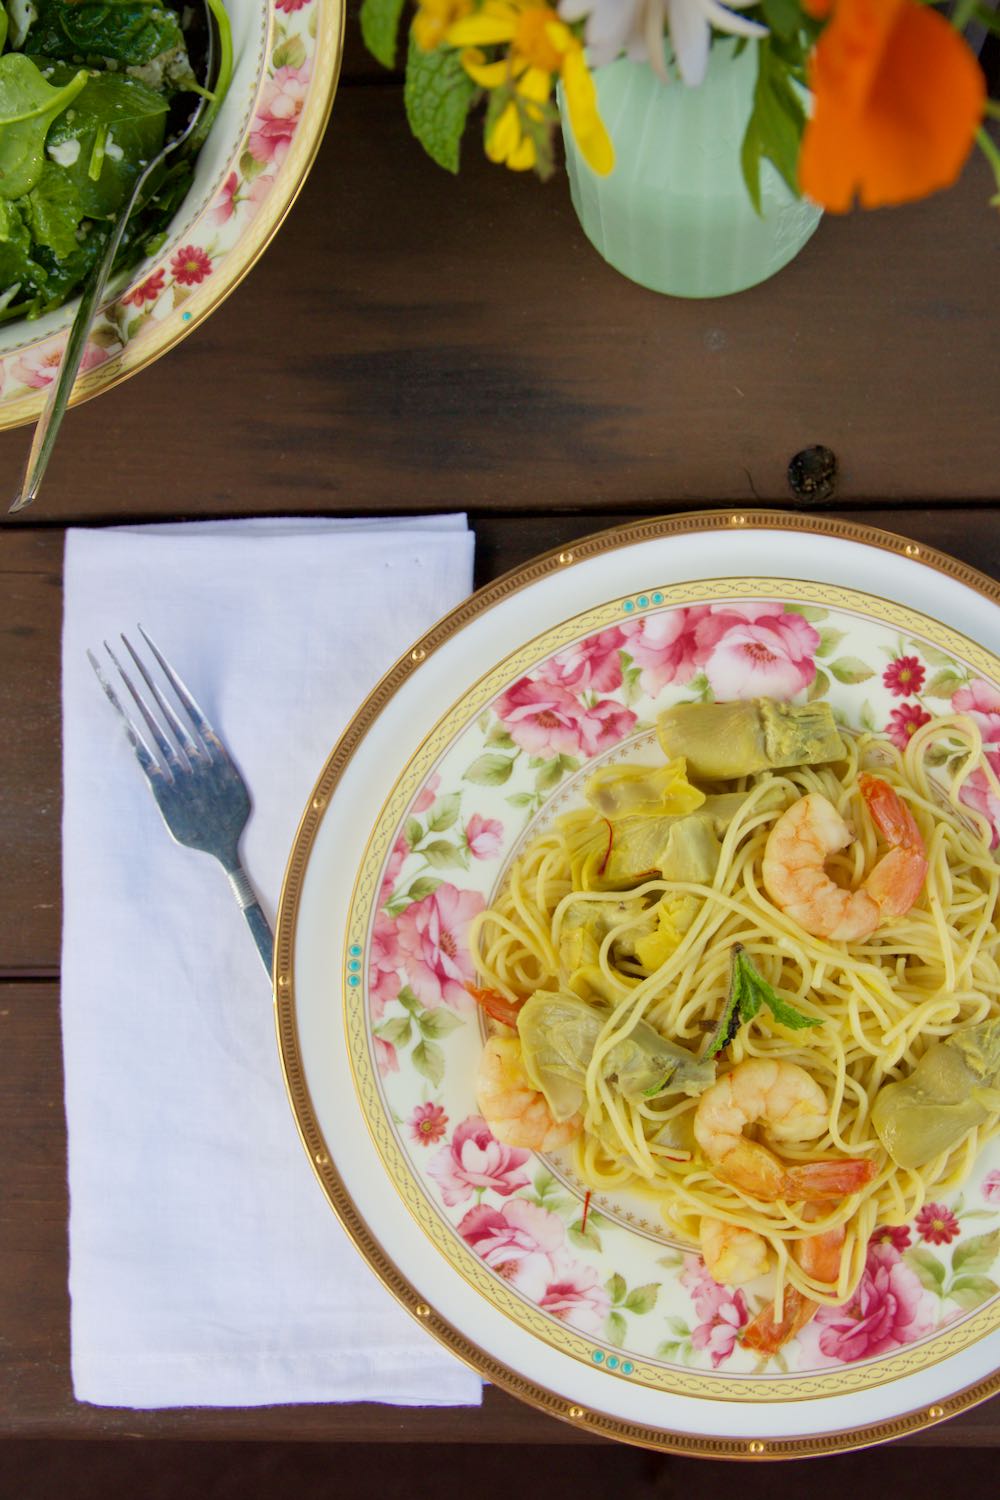 An easy pasta and shrimp dish with artichoke hearts